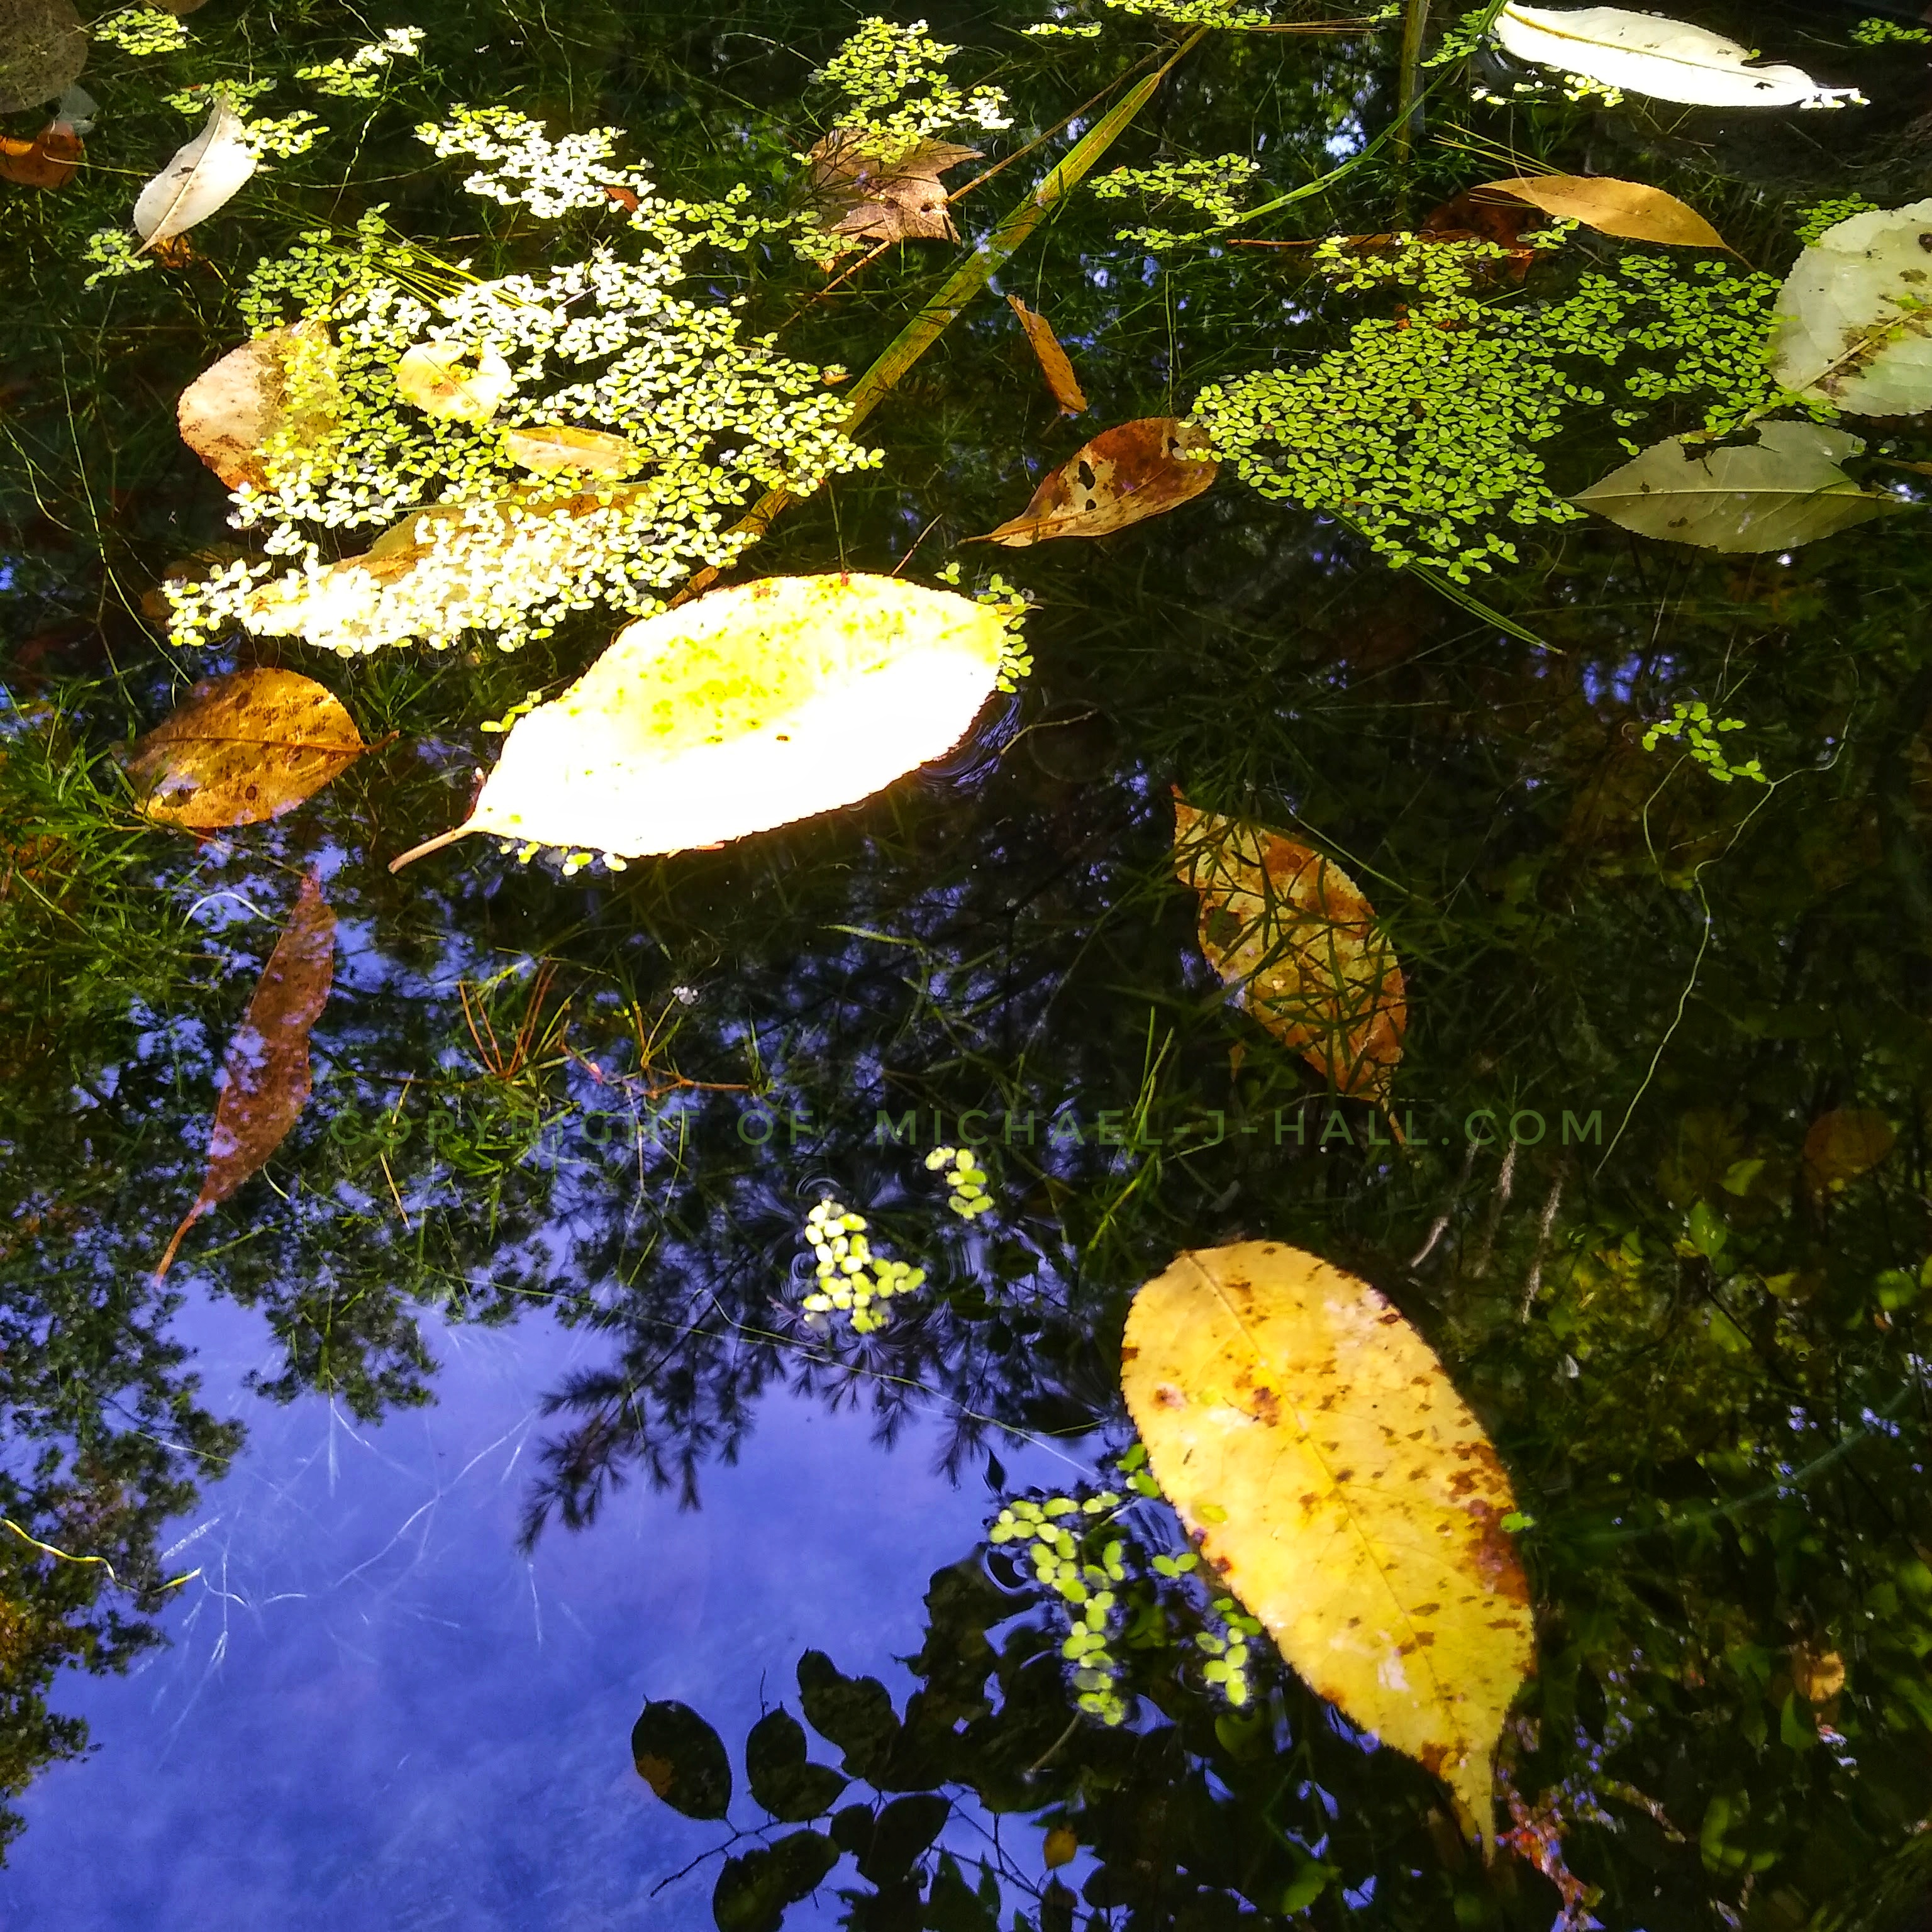 Winter has not yet arrived, yet fallen leaves and aquatic plants appear frozen in the chilly waters of a placid pond, also, managing to capture on its surface the deep blue of the cool sky above.